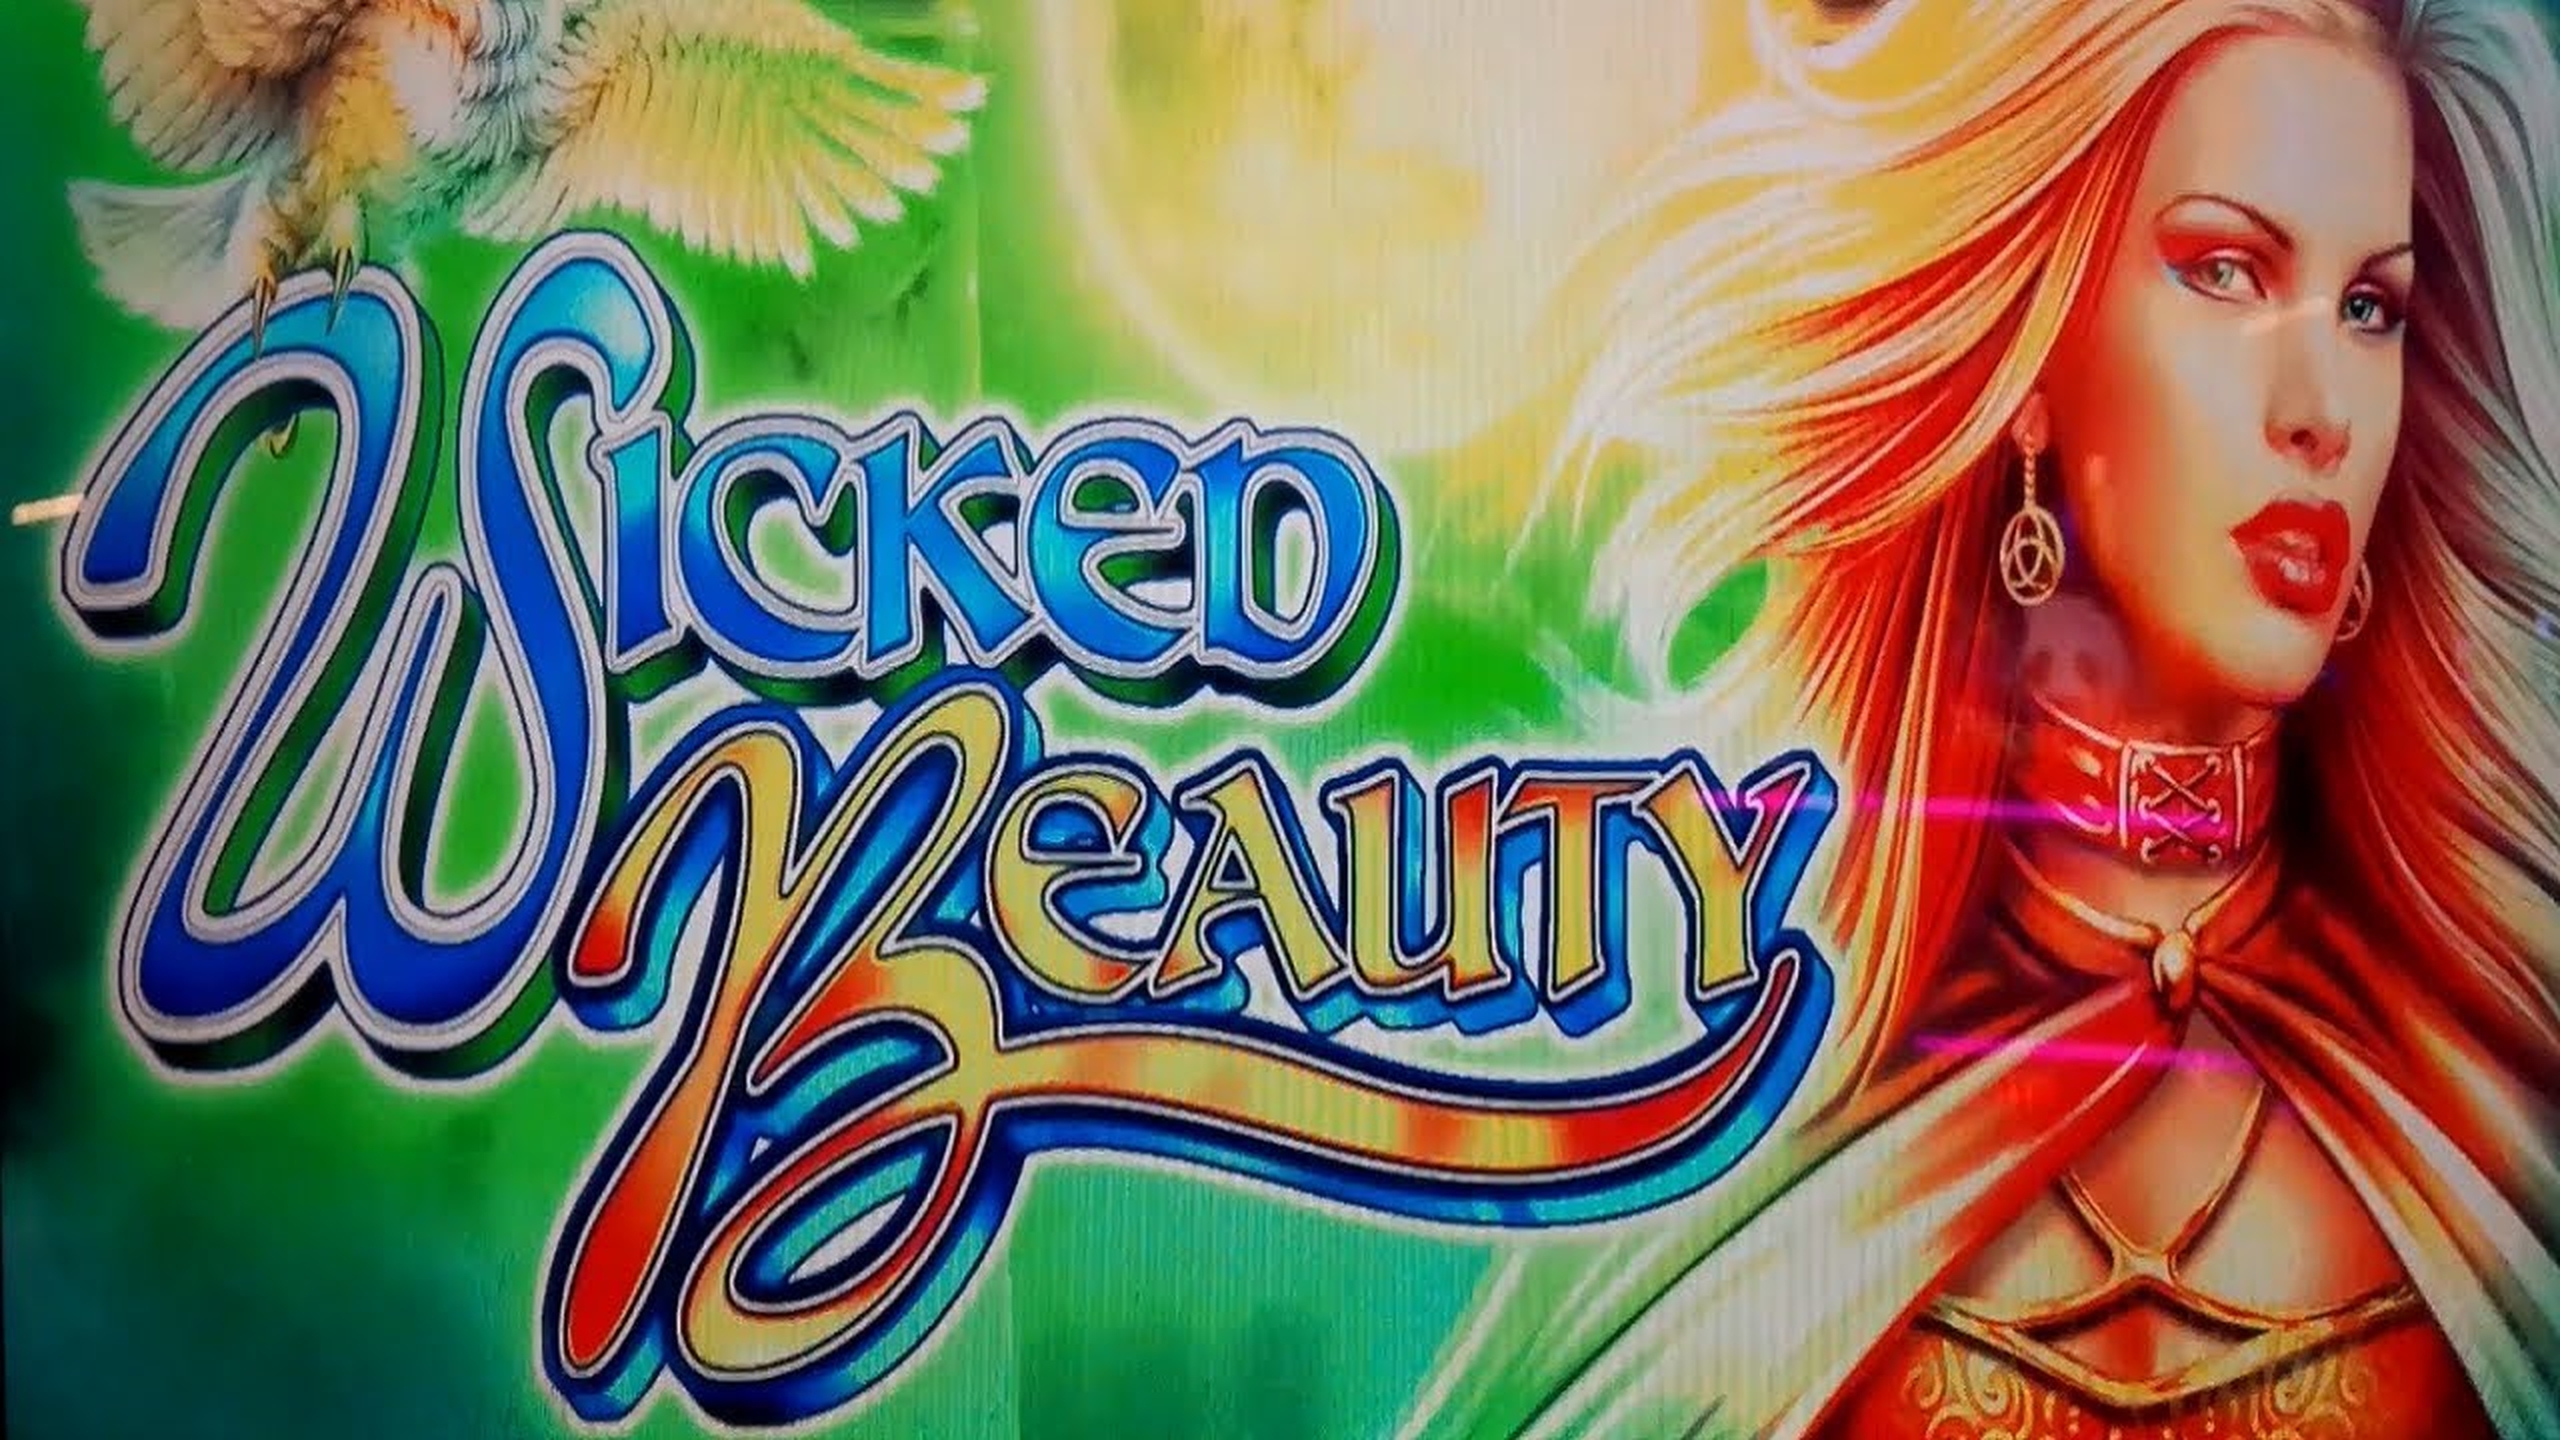 The Wicked beauty Online Slot Demo Game by WMS